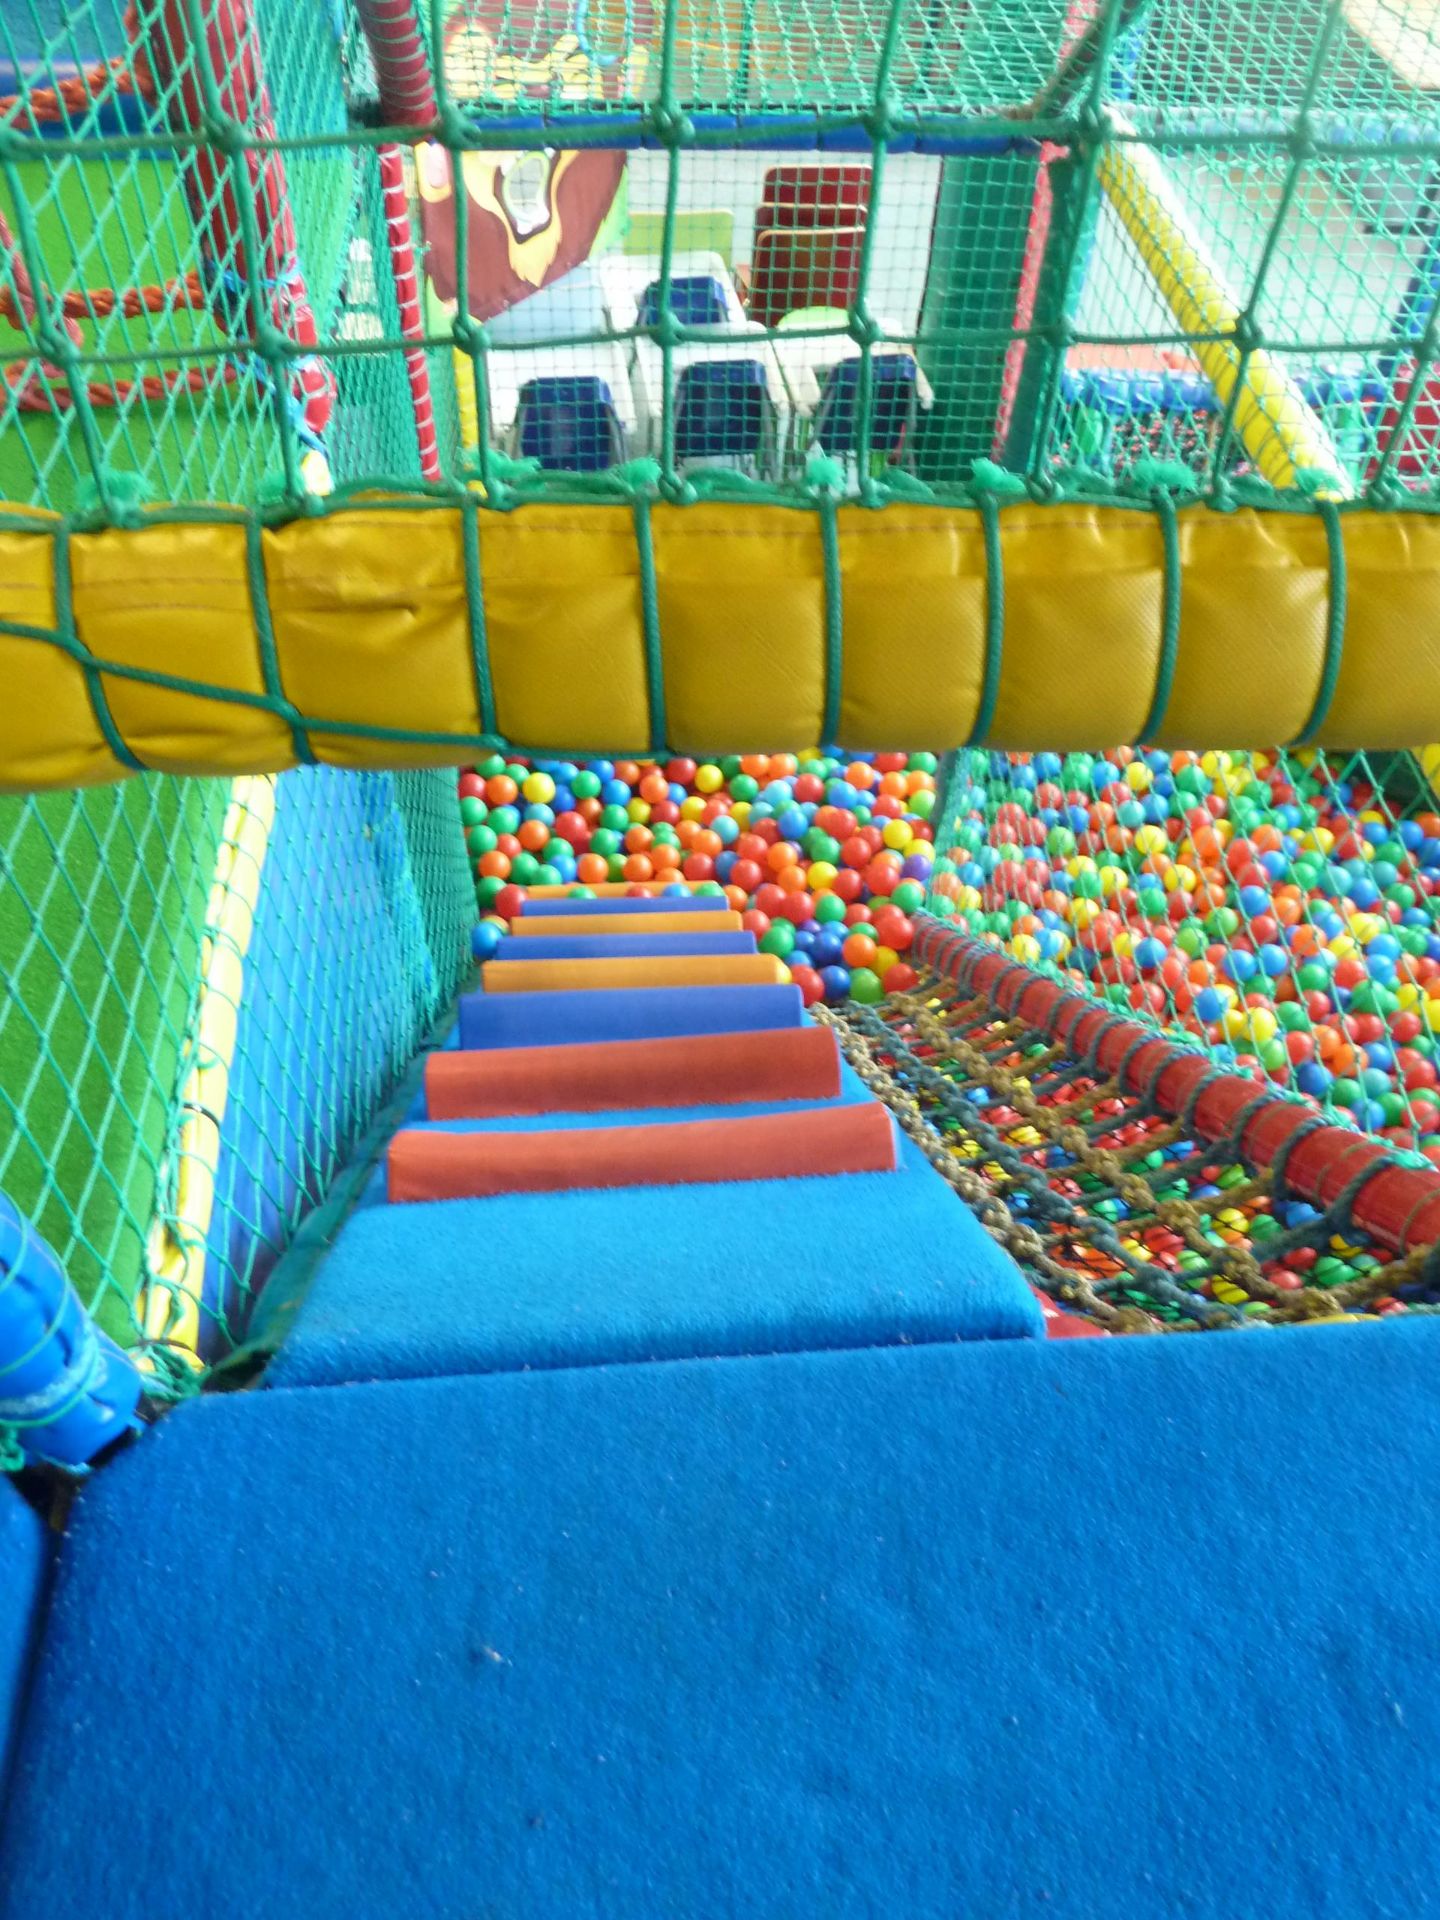 *Large soft play construction - 7.8m w x 5.8m d x 4.2m h. Constructed over two levels - Image 19 of 34